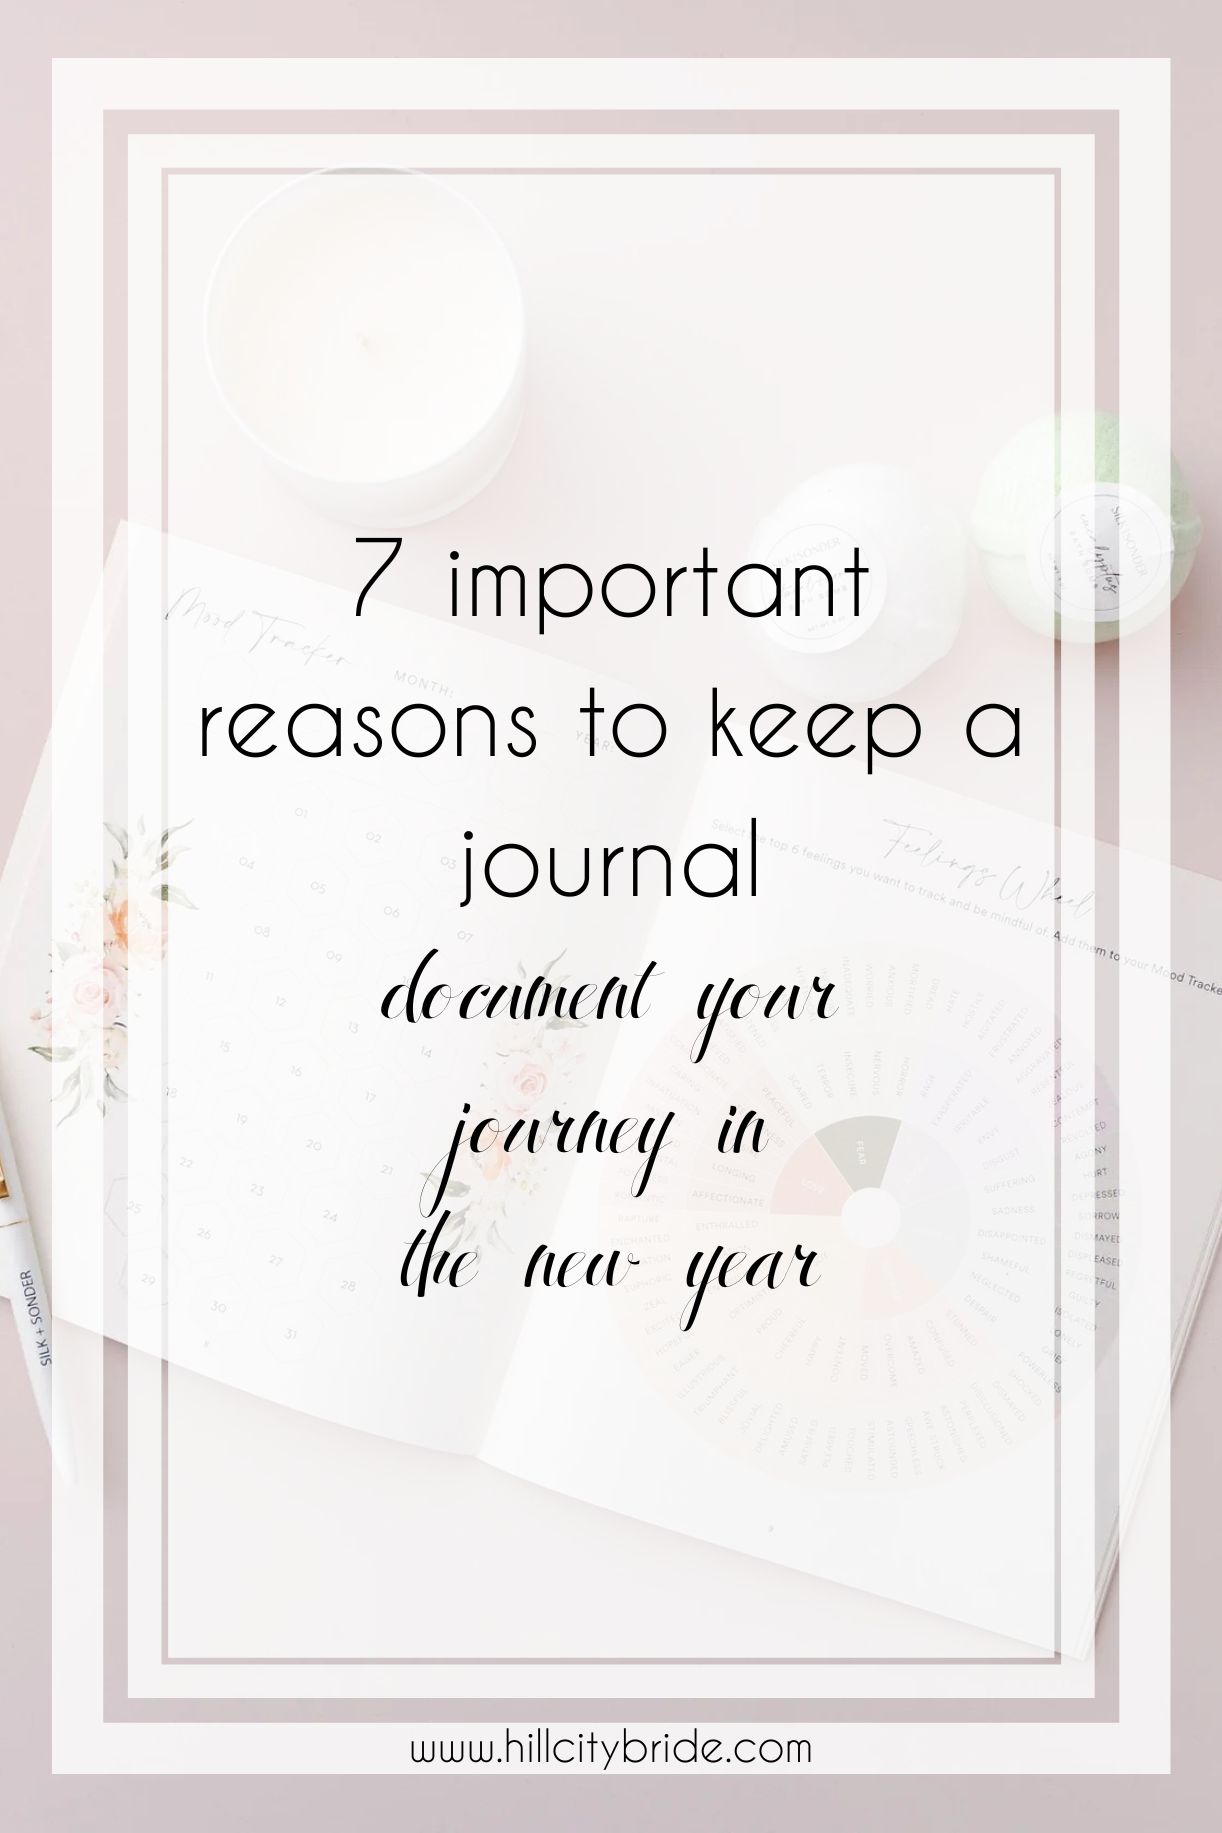 7 Important Reasons to Keep a Journal in the New Year